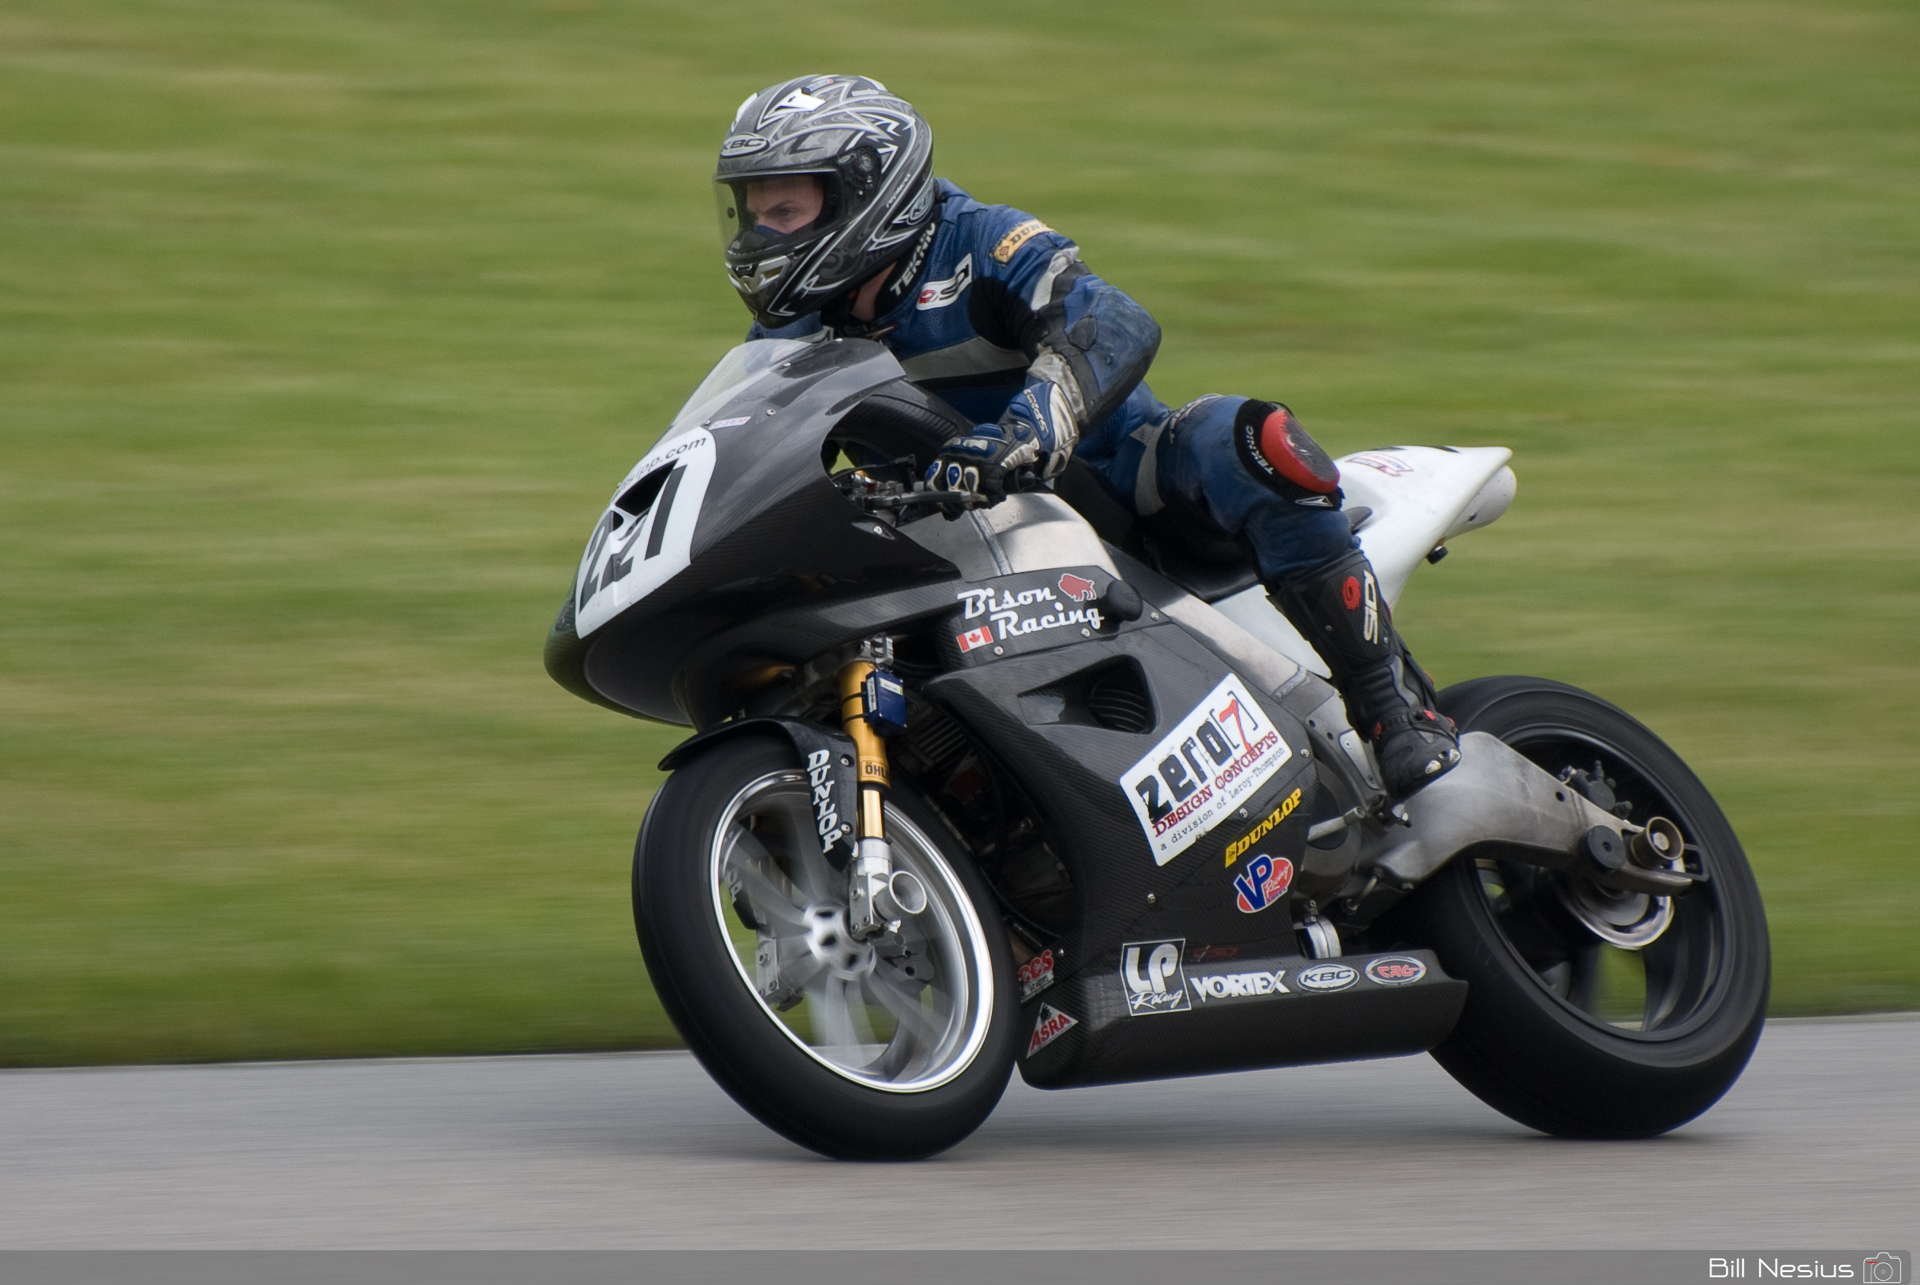 Charles Sipp on the Number 221 Bison Racing Buell XB12R / DSC_2773 / 3